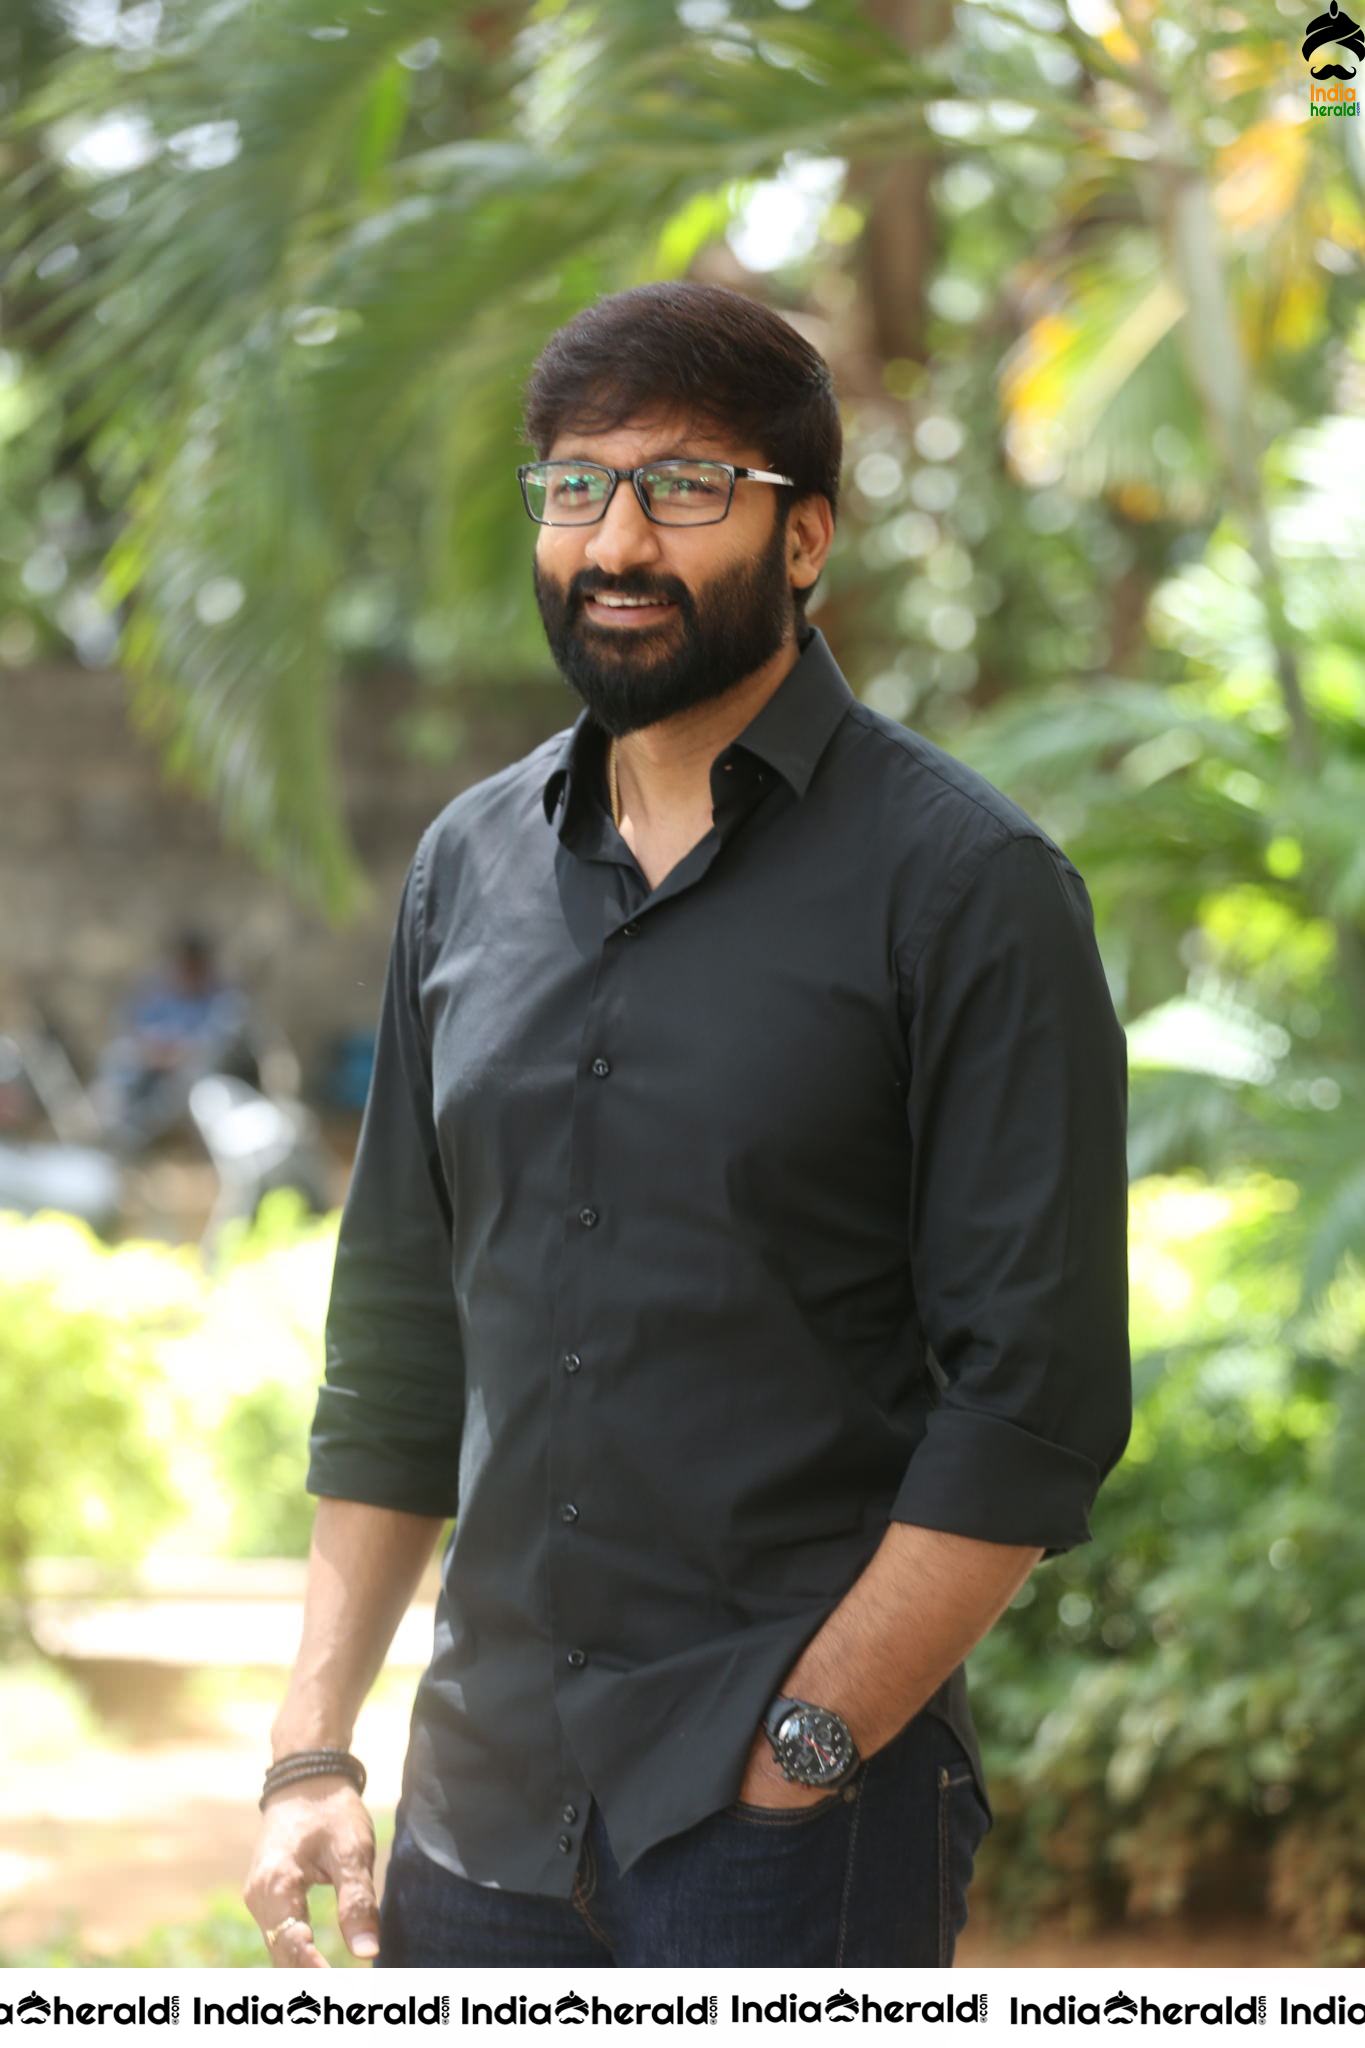 Actor Gopichand Latest Clicks with Nerd Glasses and Thick Beard Set 1